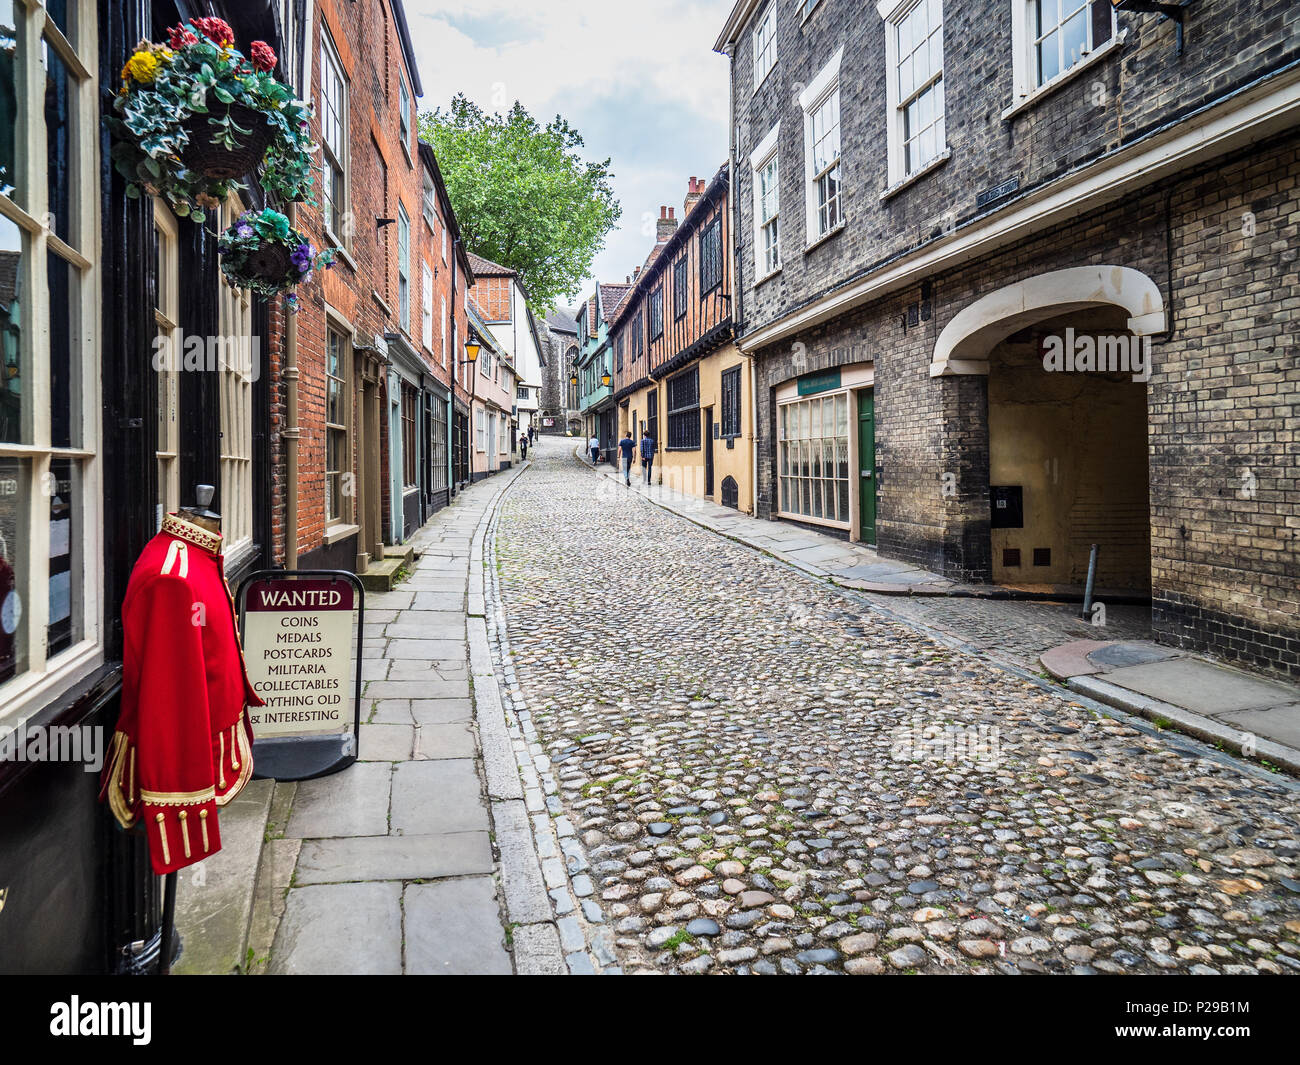 Elm Hill Norwich - a historic cobbled lane in central Norwich, UK. The street contains a number of historic buildings dating back to Tudor times. Stock Photo